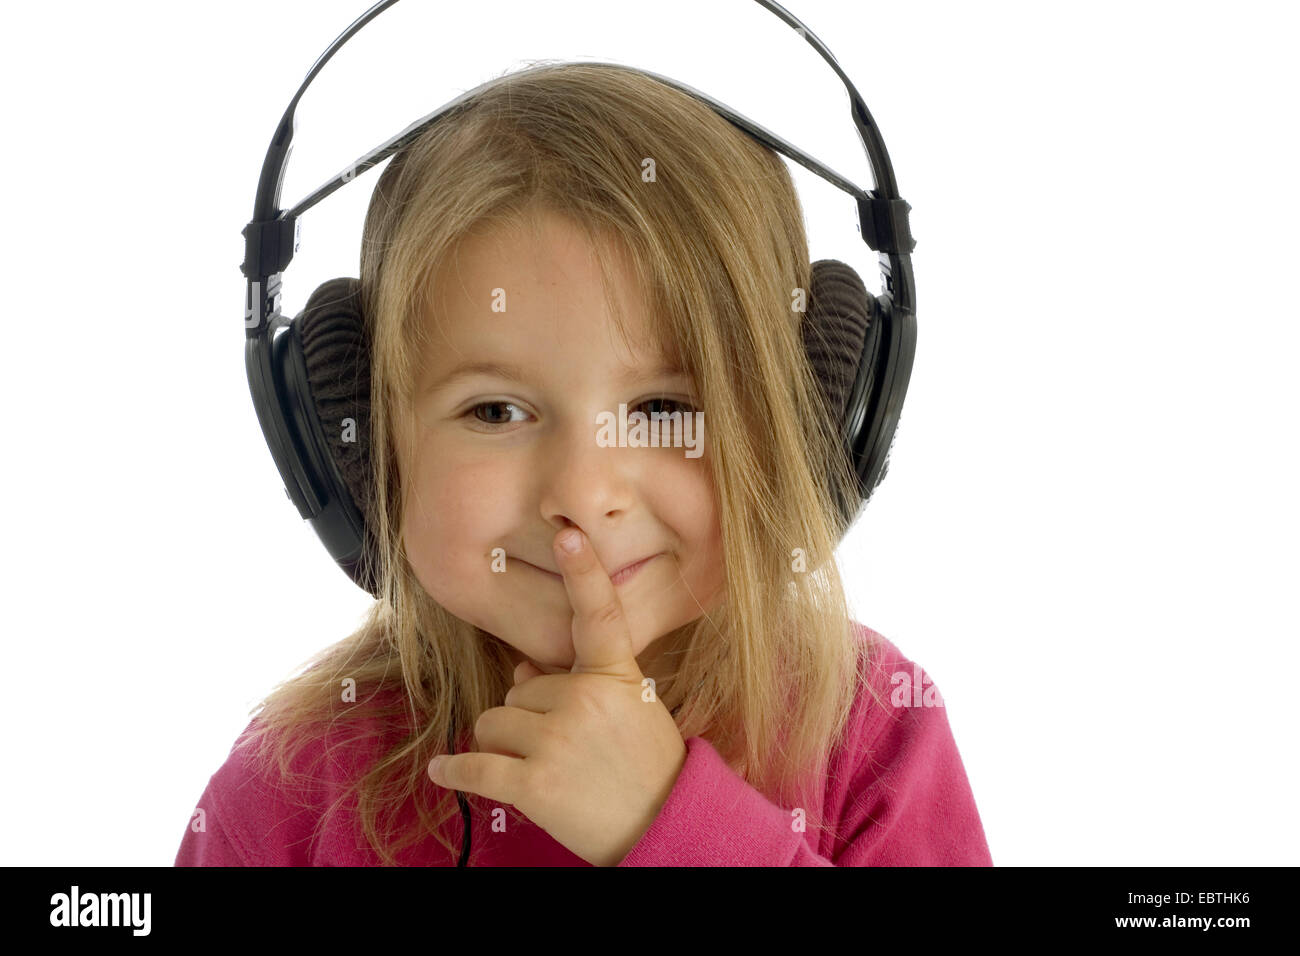 little girl smiling while listening to something by earphones Stock Photo